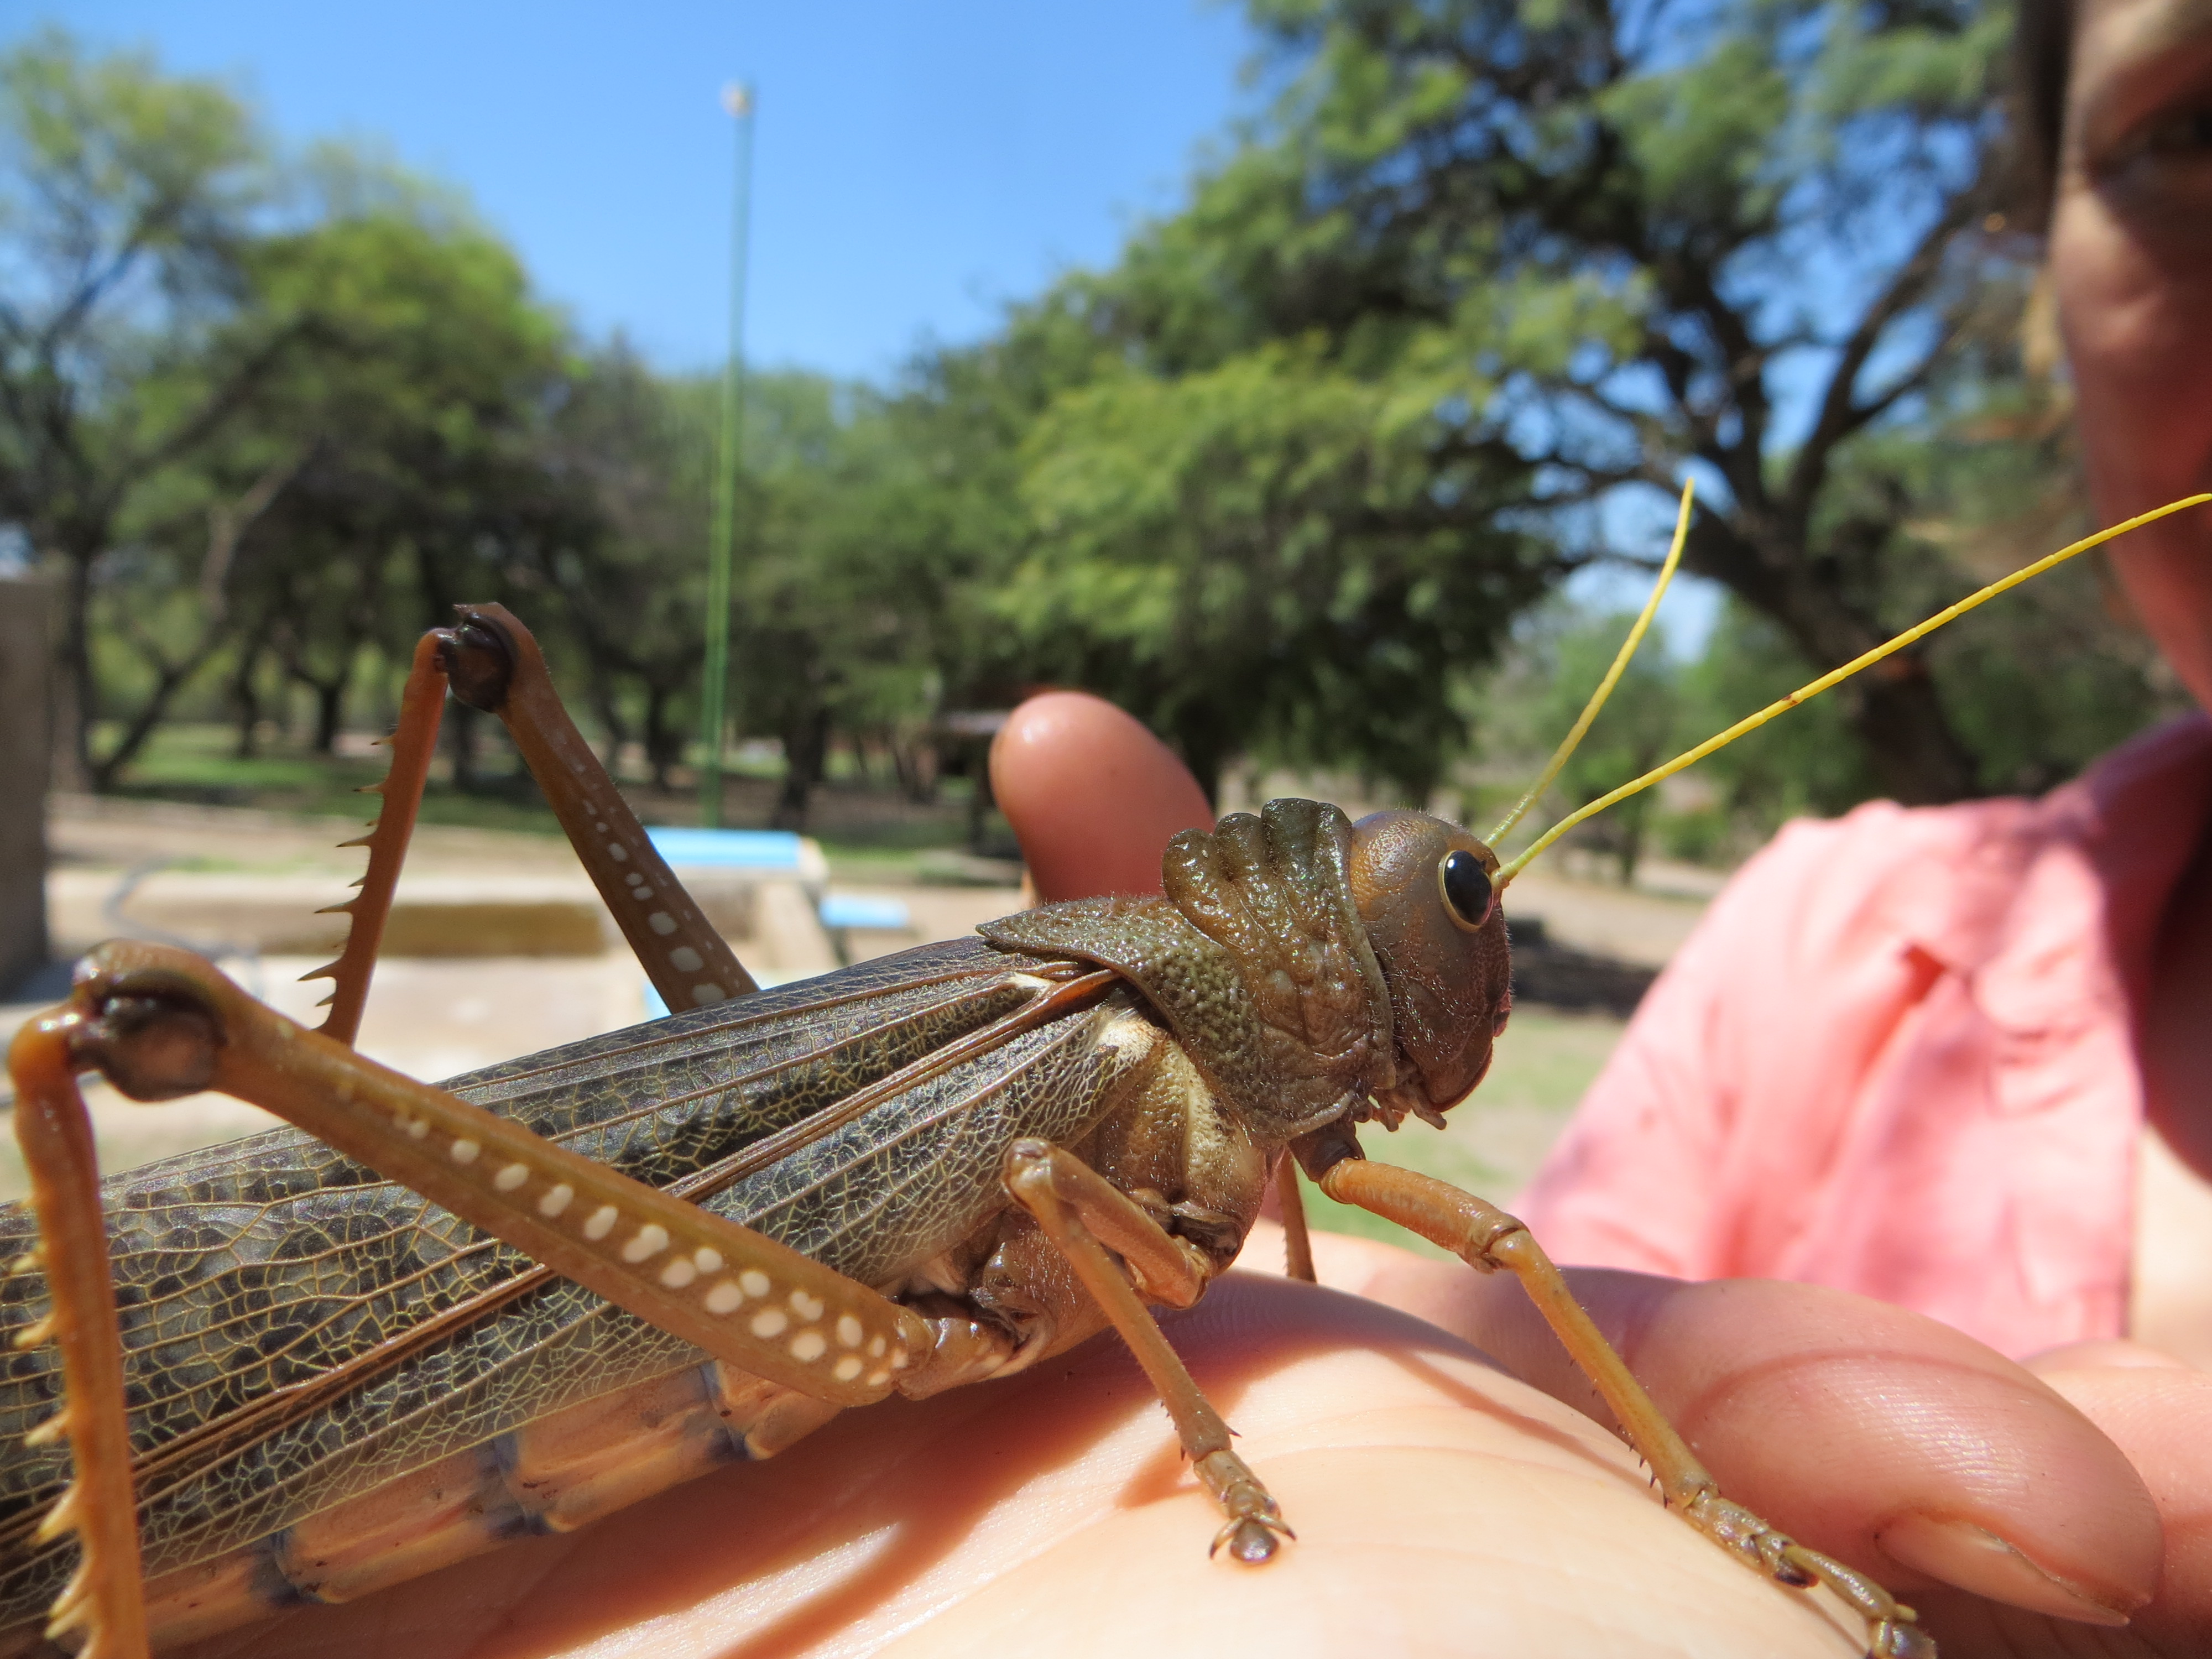 Giant Grasshoppers